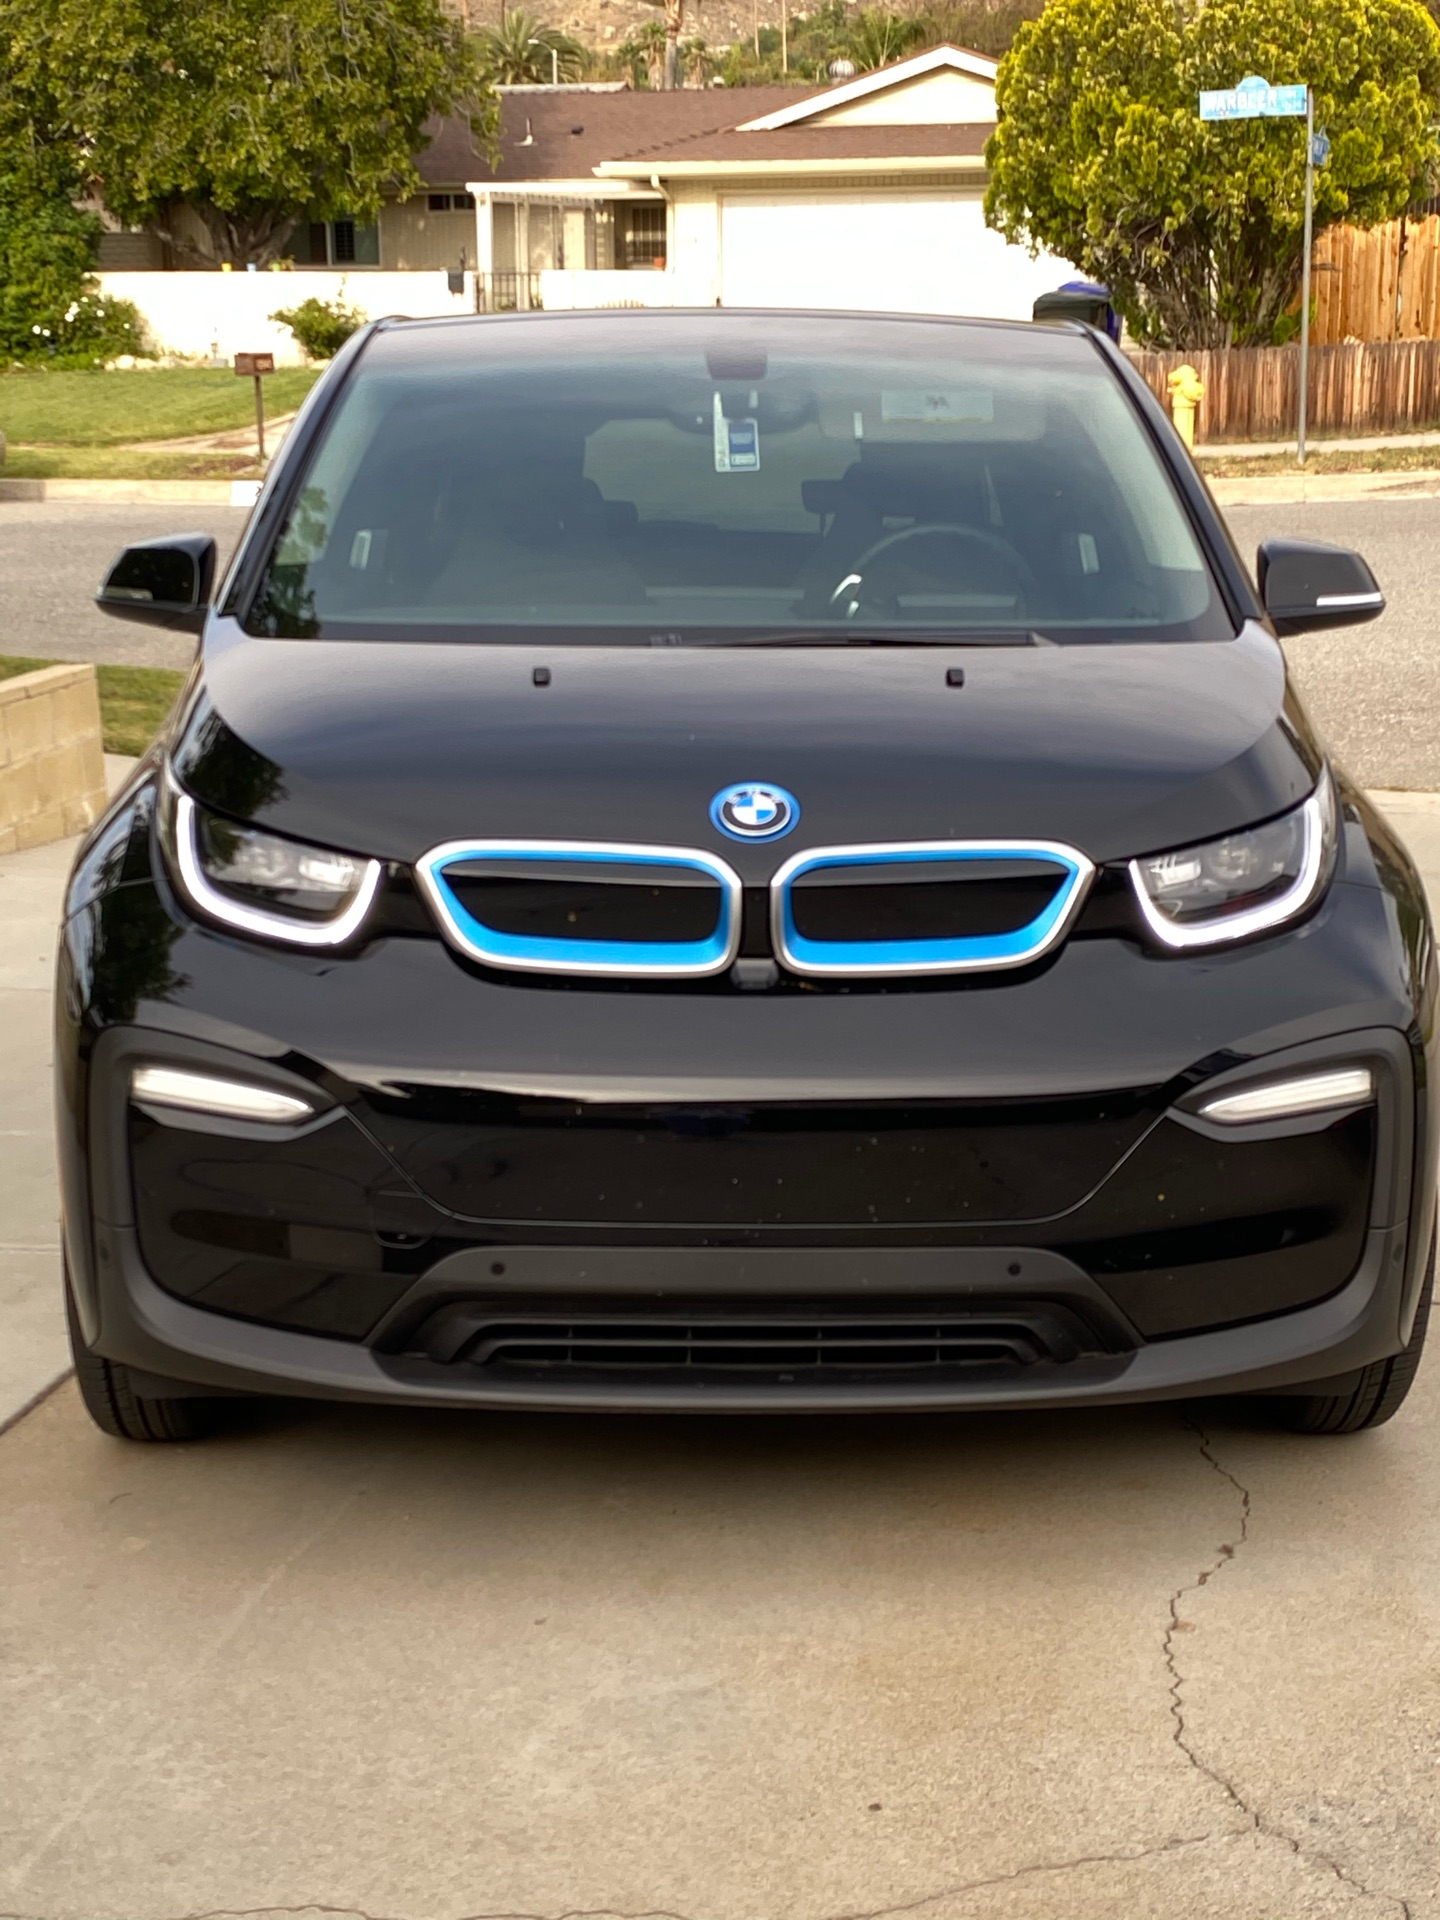 BMW i3 2021 Lease Deals in Grand Terrace, California | Current Offers